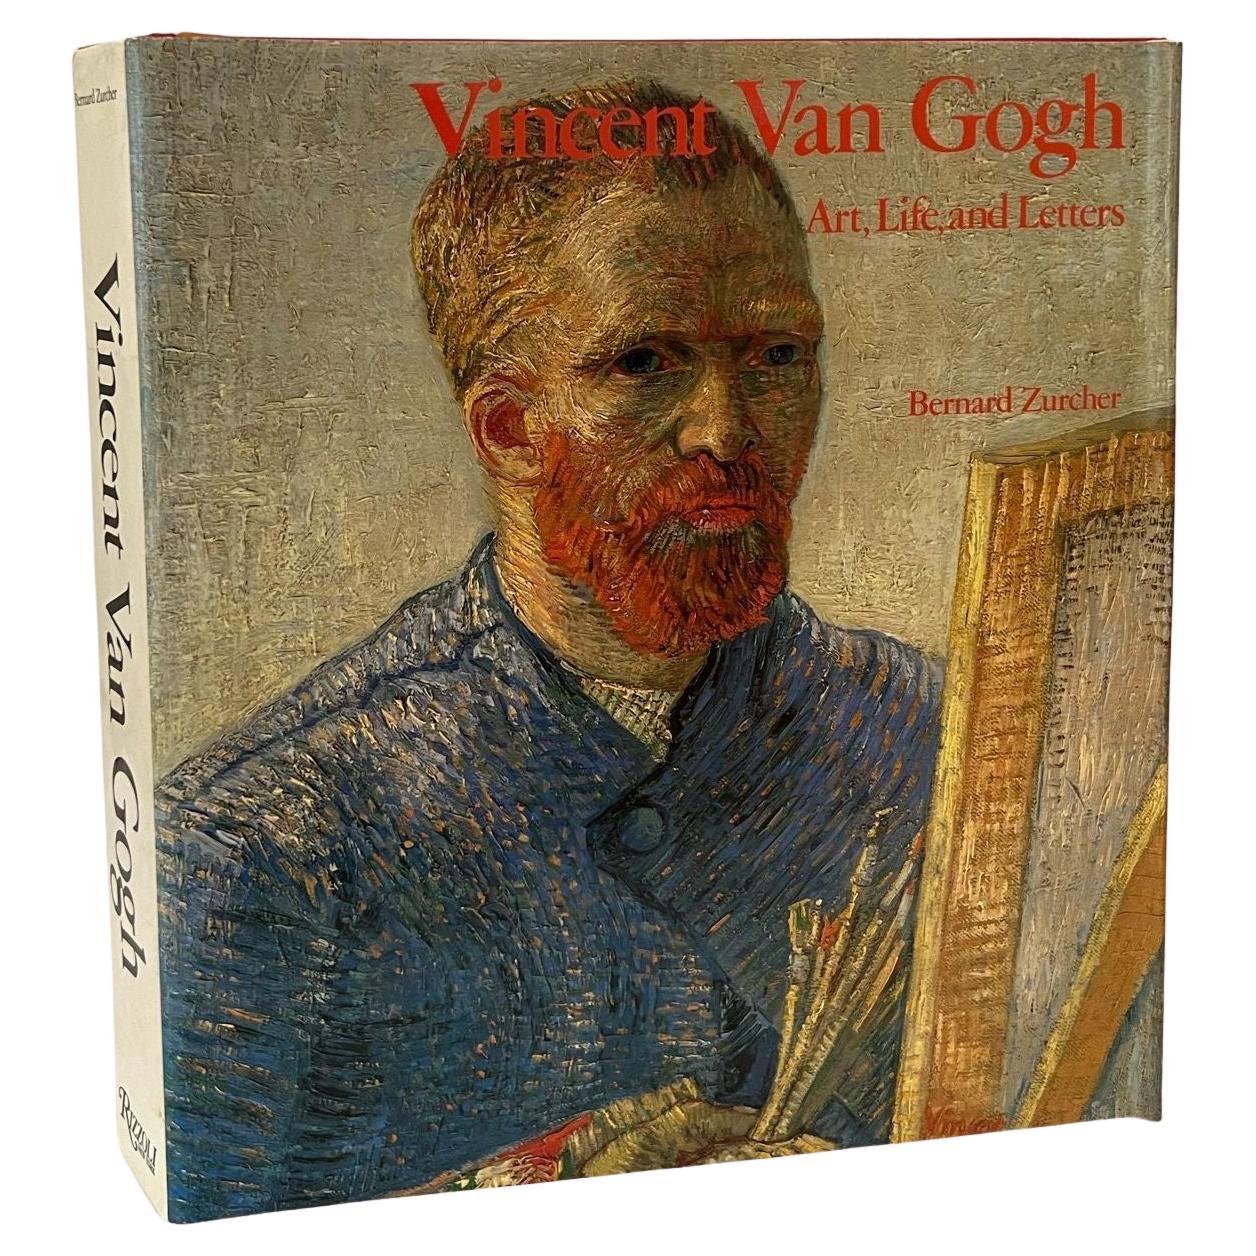 1985 Vincent Van Gogh Art Life and Letters by Bernard Zucker Hardcover Rizzolli For Sale